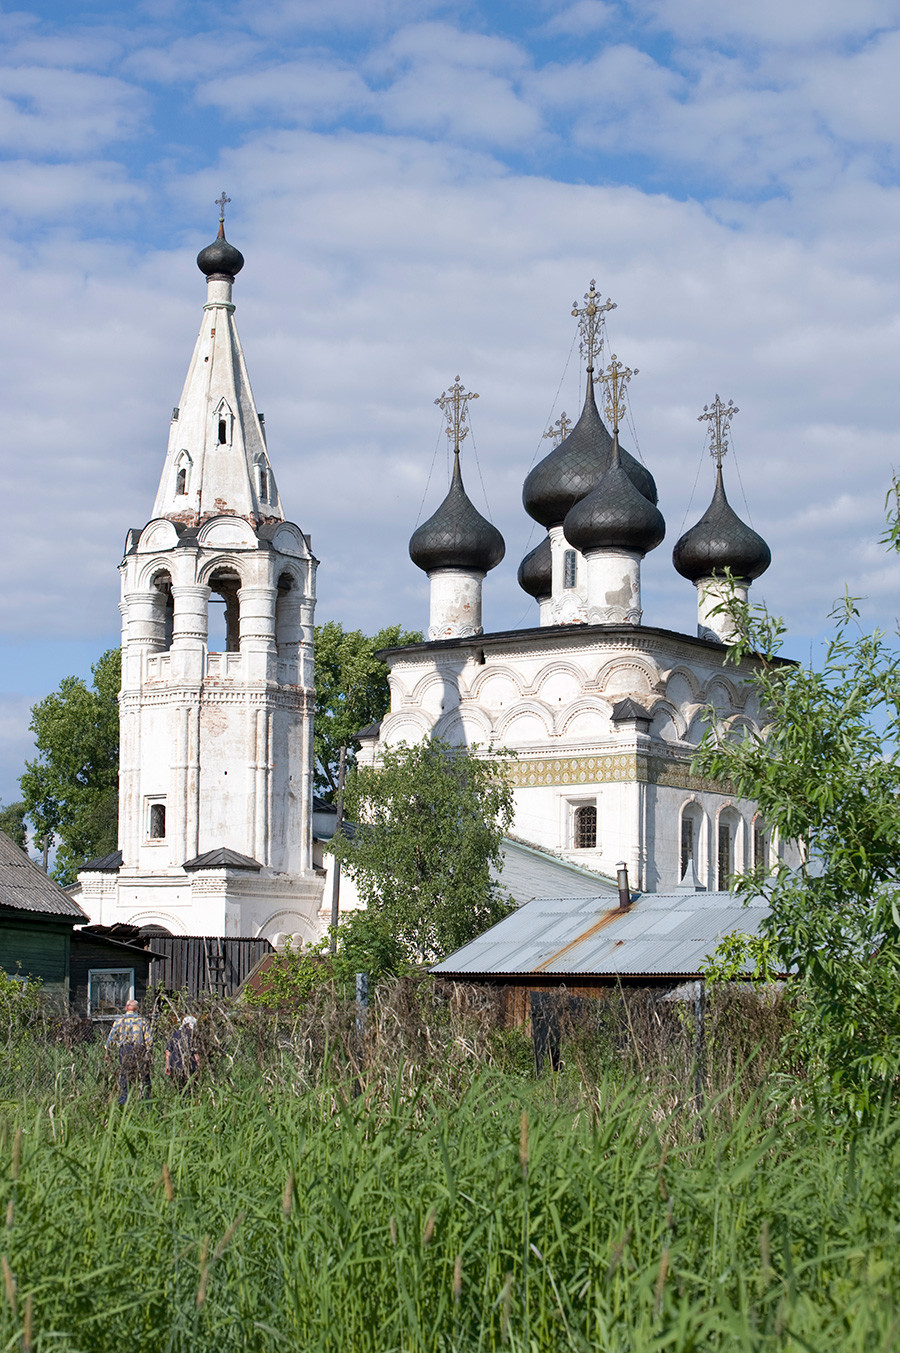 Belozersk. Bell tower & Church of the Icon of the Most Merciful Savior, southwest view. June 9, 2010 